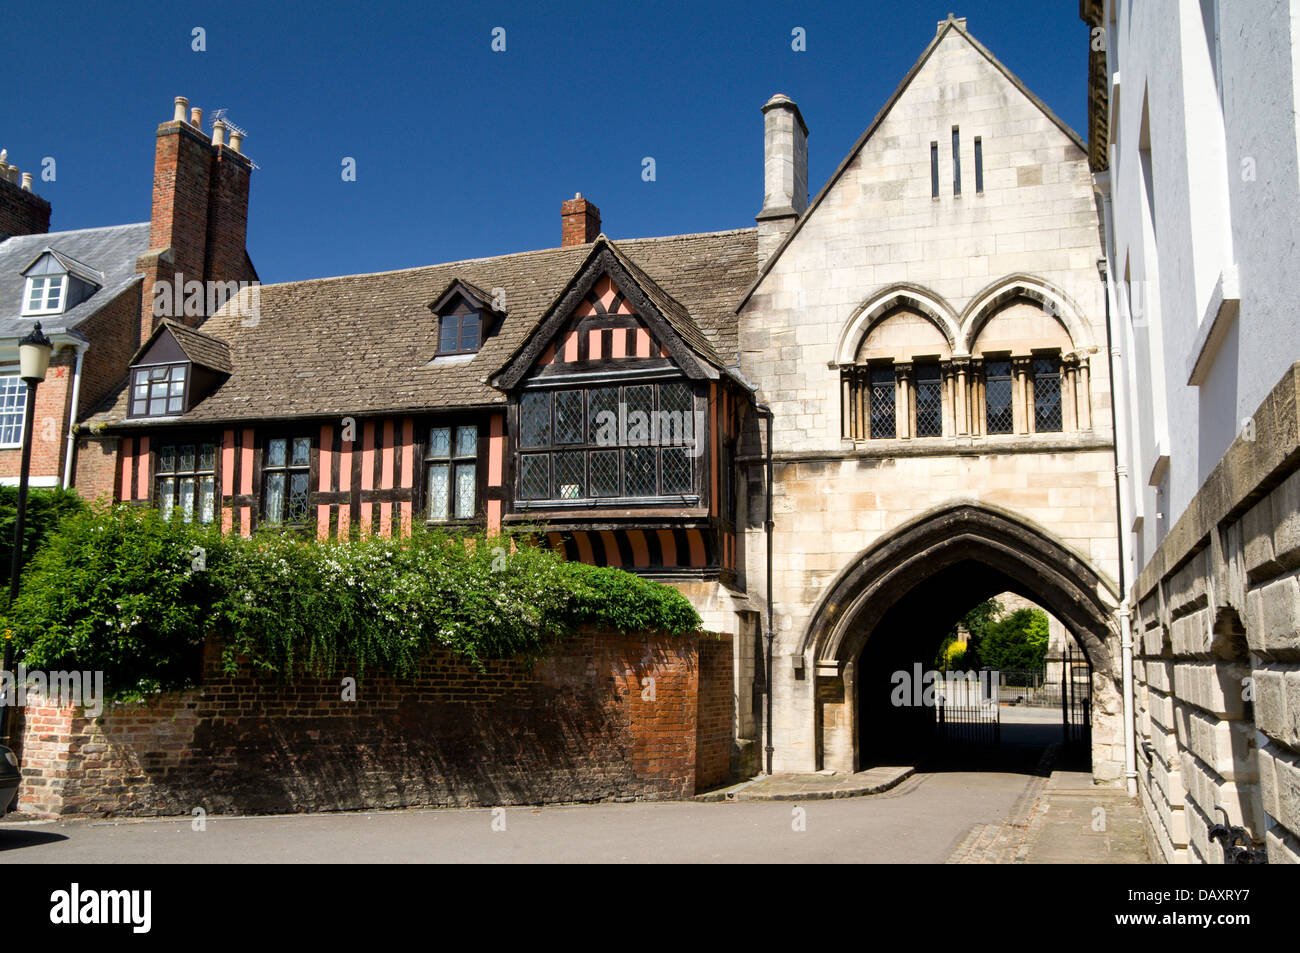 St Mary's Gate, Cathedral Precinct, Gloucester, Gloucestershire, England. Stock Photo